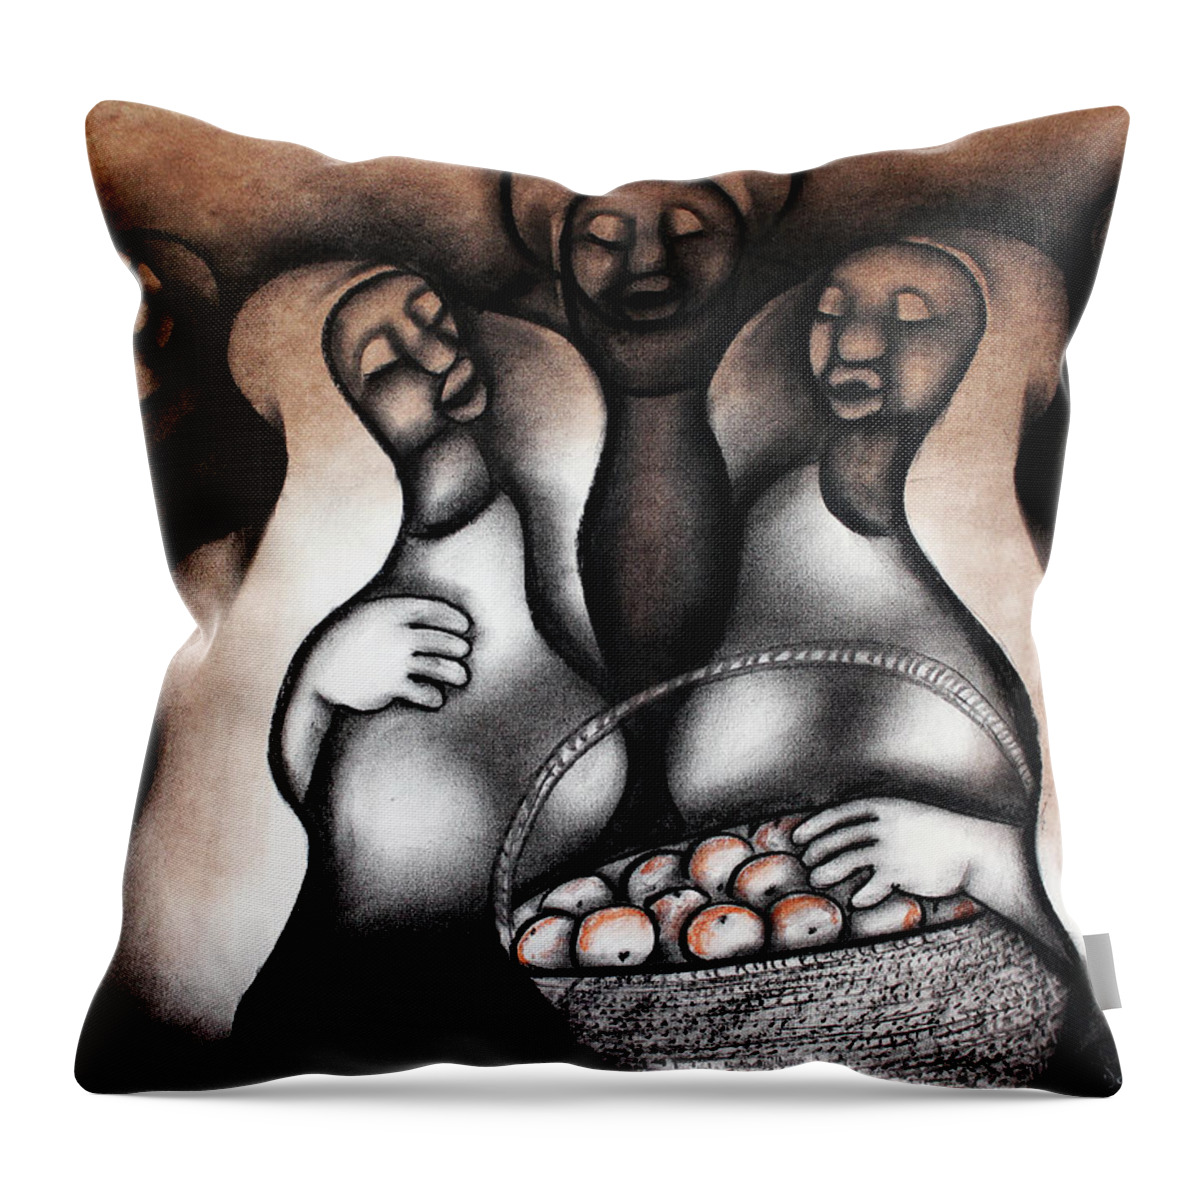 Moa Throw Pillow featuring the painting Circle Of Hope by David Mbele